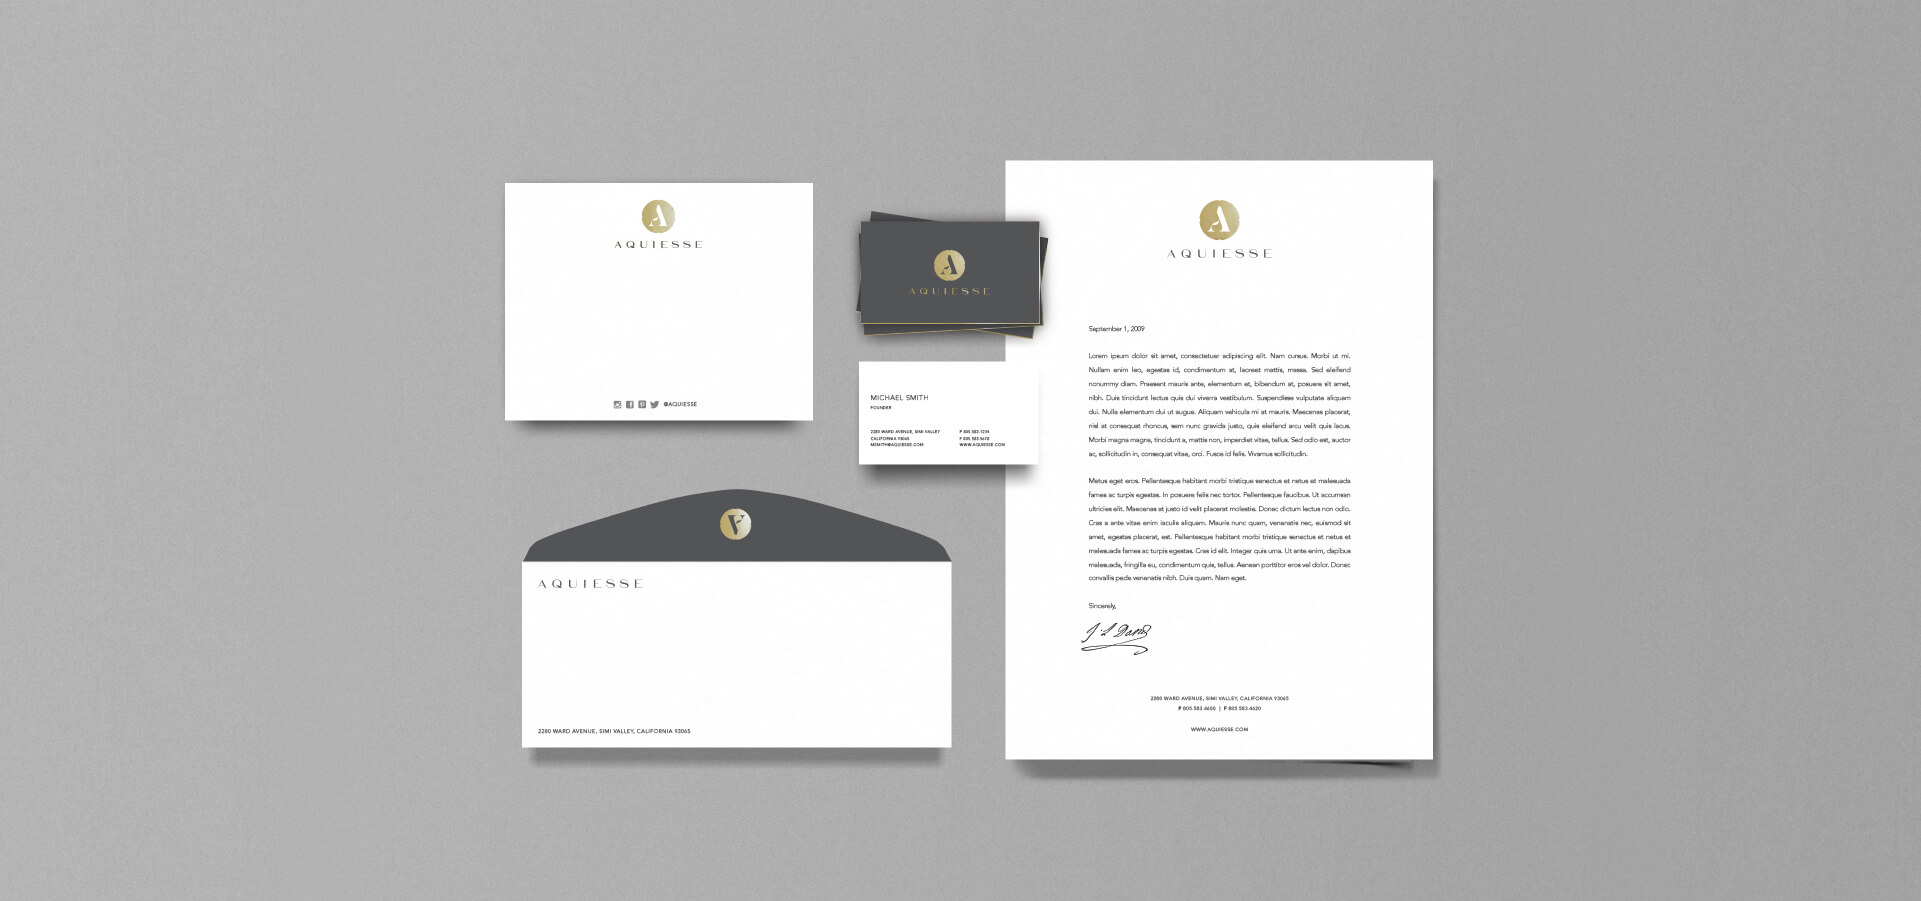 Aquiesse stationery and collateral